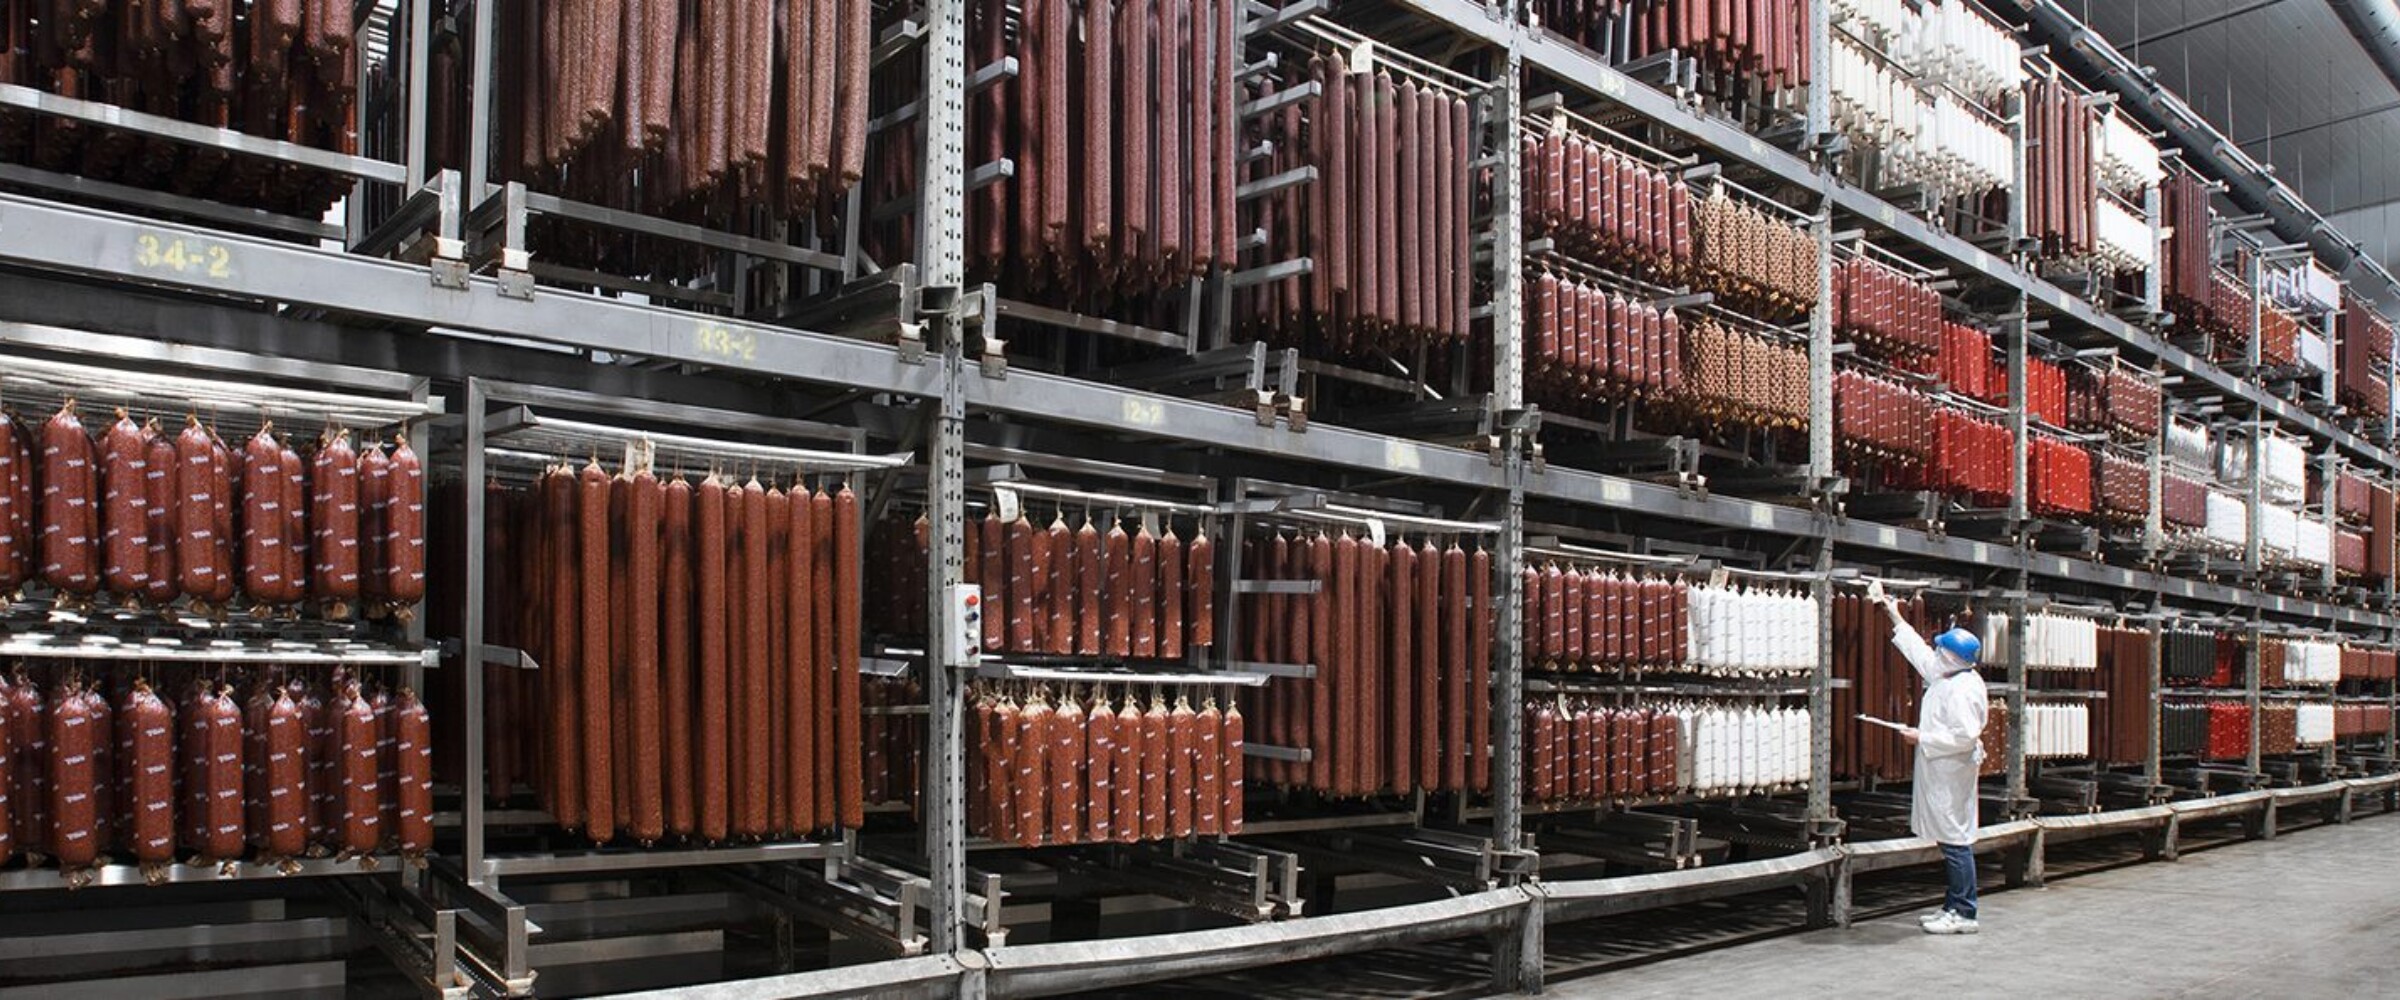 Piller's worker doing inventory of meat products in a temperature controlled warehouse.